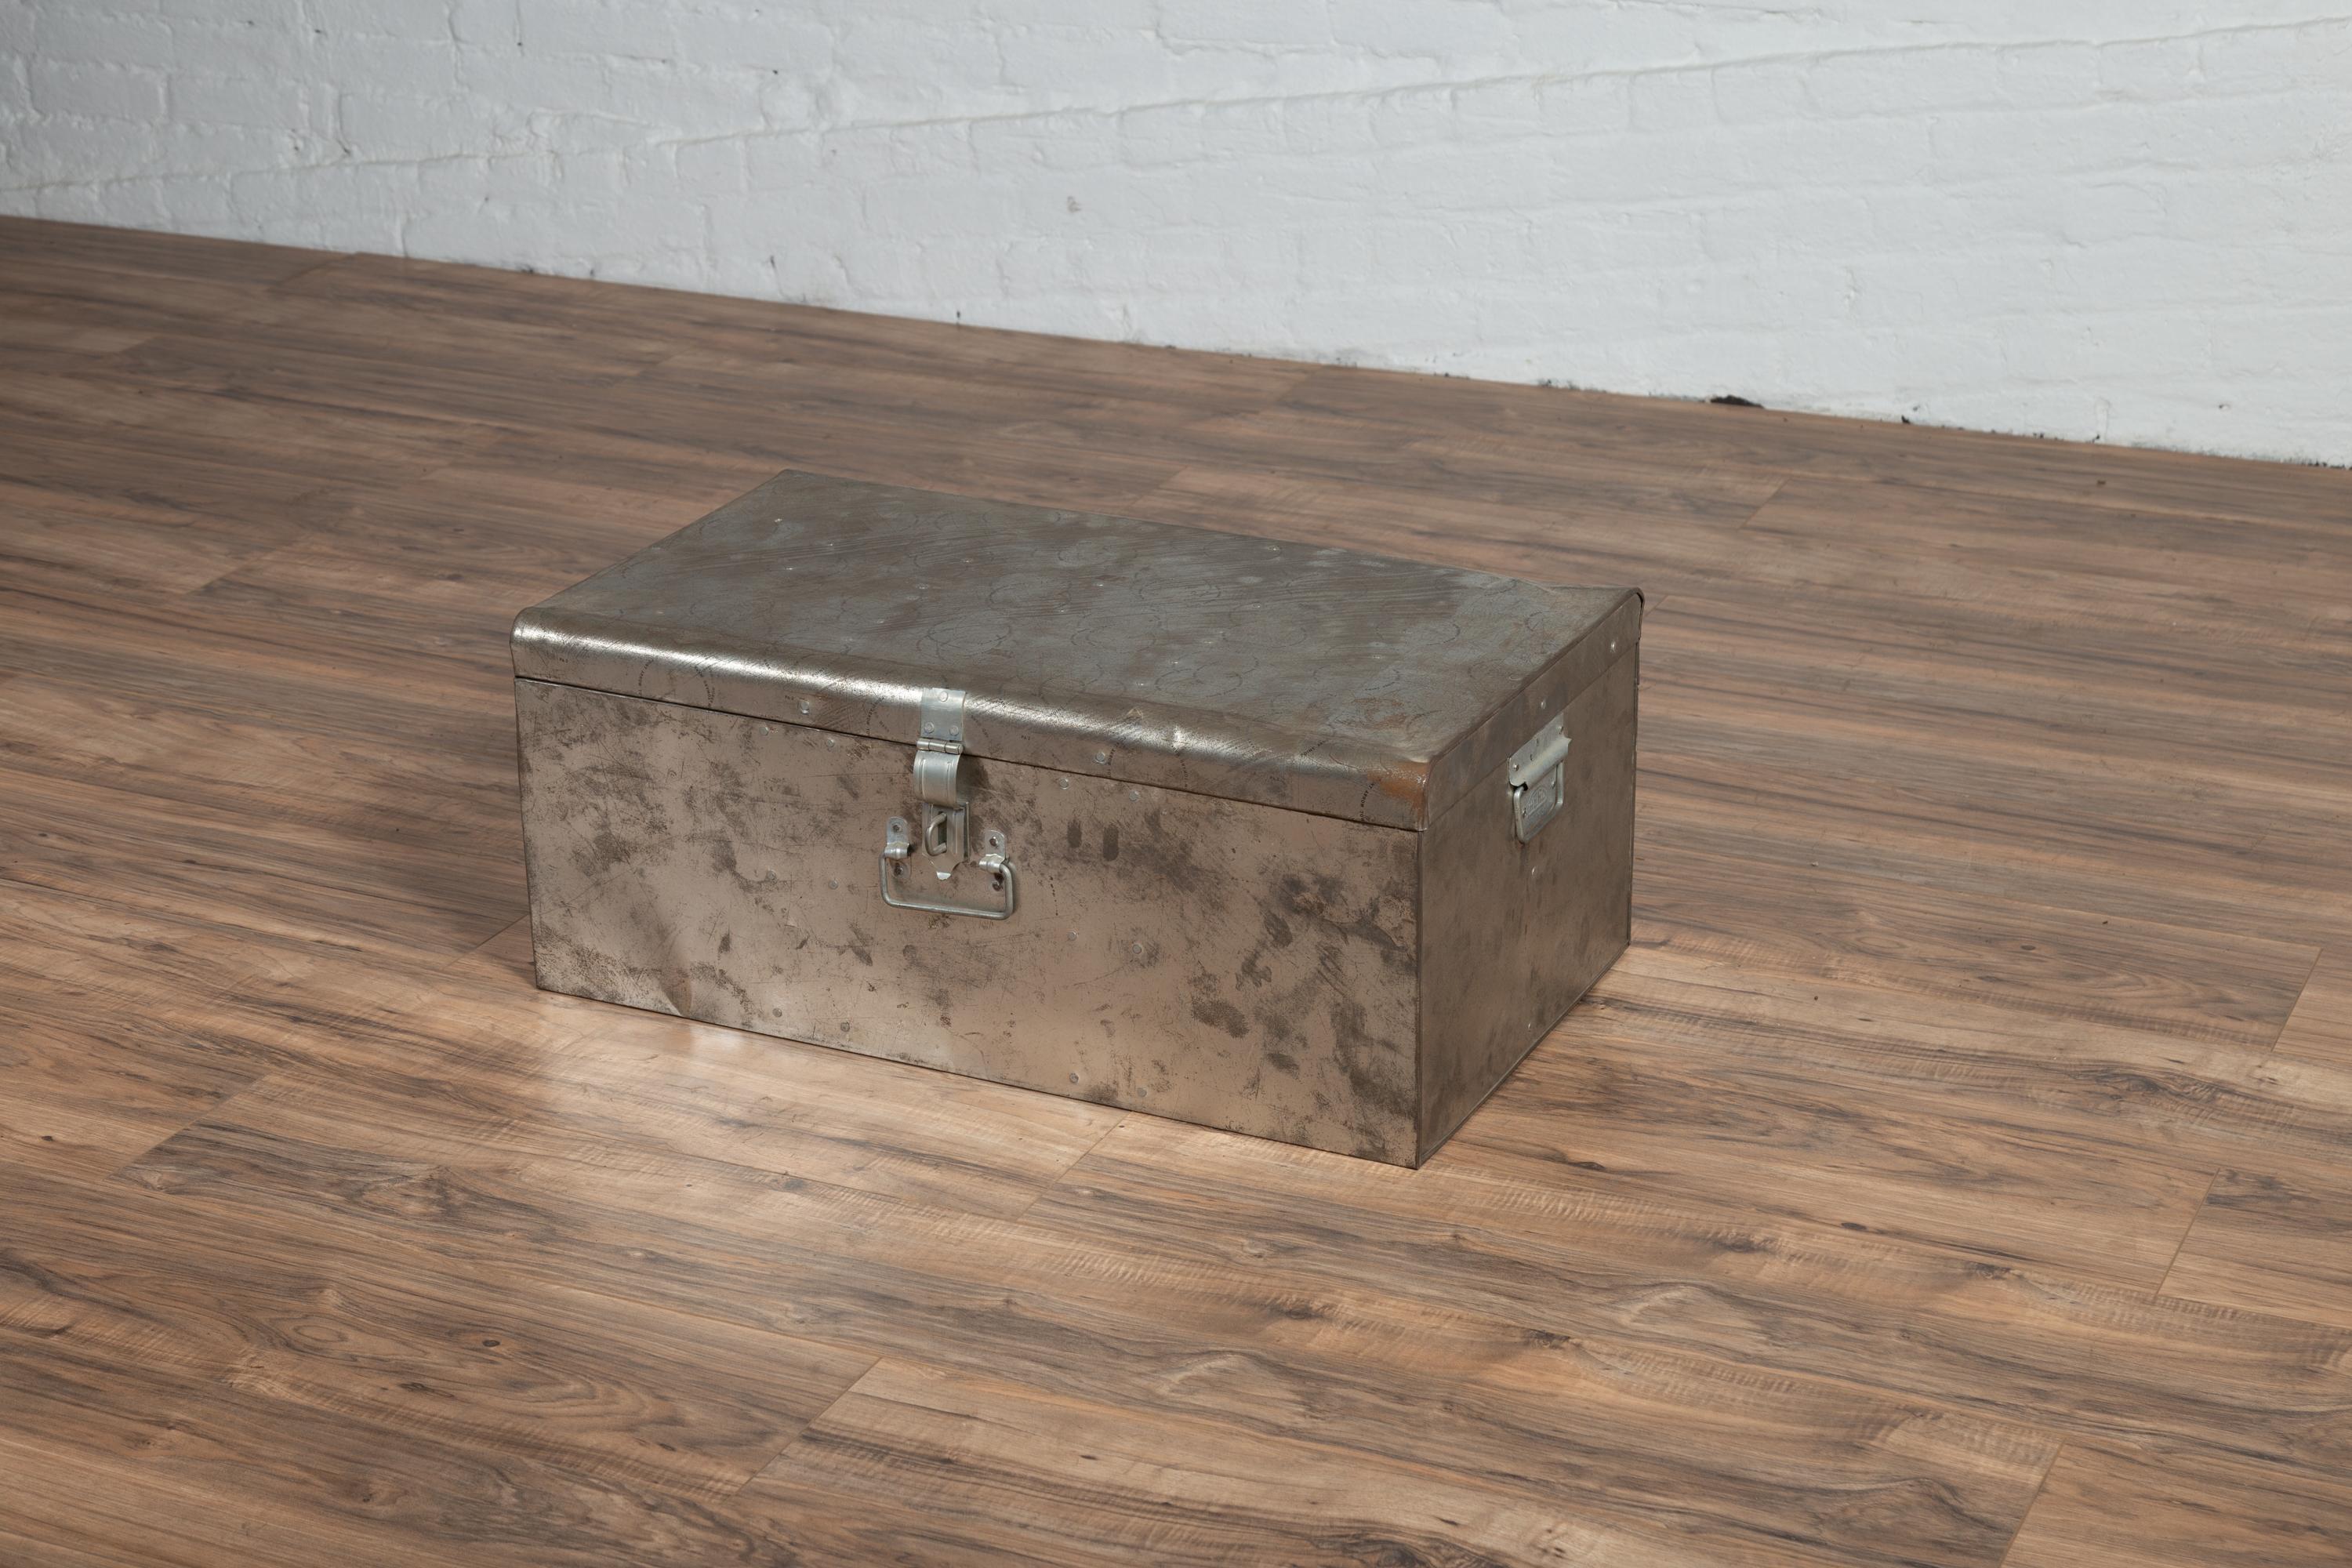 Indian Vintage Metal Tool Box with Distressed Silver Colored Finish and Handles 1